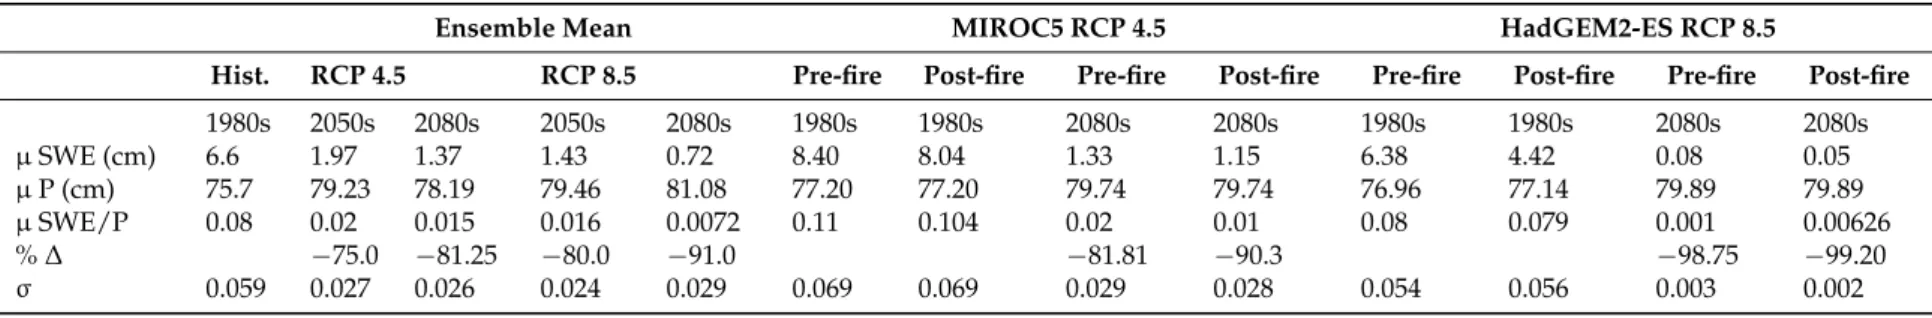 Table 6. Ensemble mean of snow water equivalent to precipitation (SWE/P) before forest cover reduction, and SWE/P before and after forest cover reduction for MIROC5 in RCP 4.5 and HadGEM2-ES in RCP 8.5.